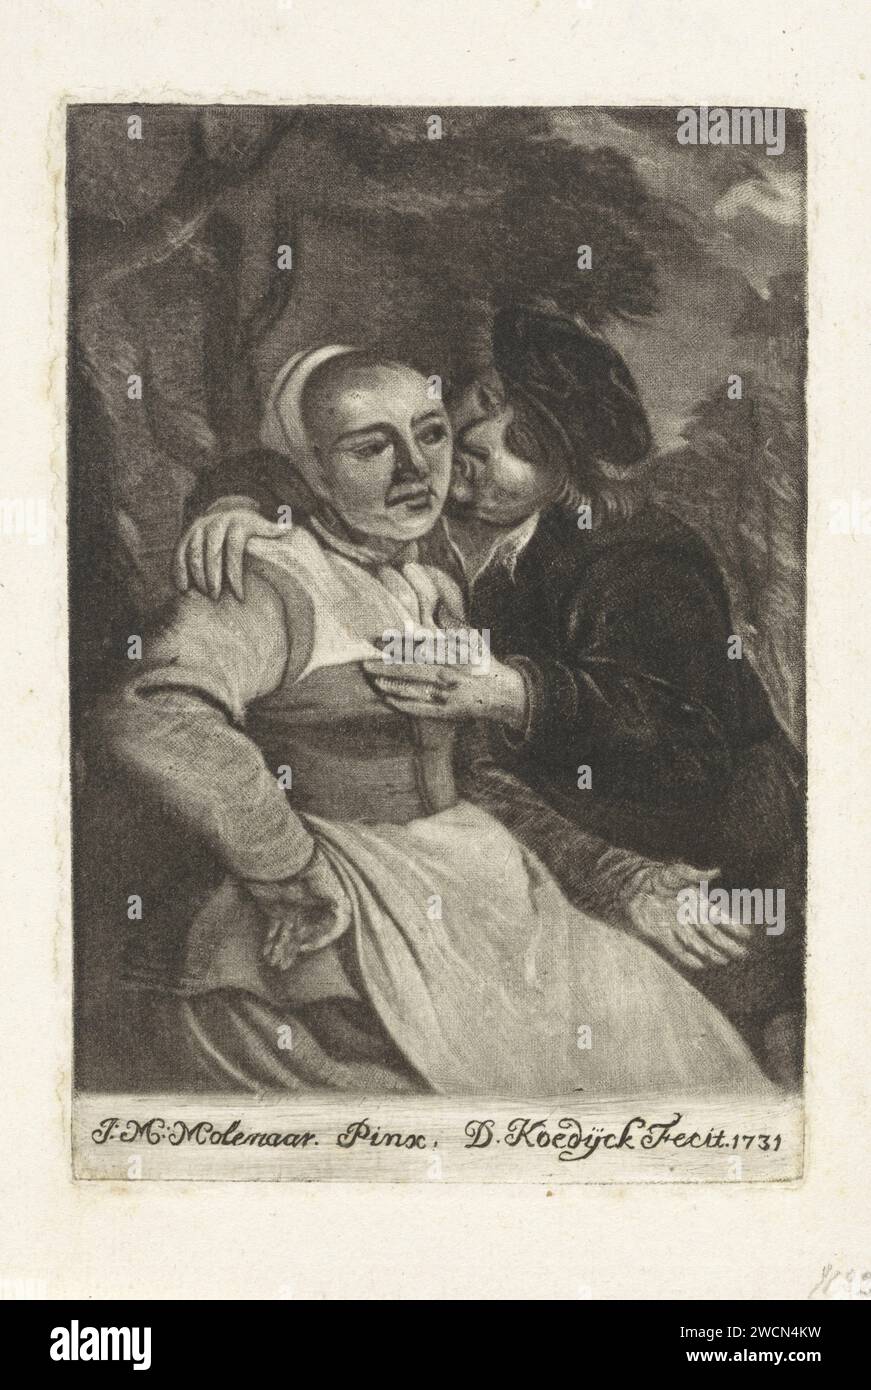 Man embraces a woman, Dirk Koedijck, after Jan Miense Molenaer, 1731 print A man embraces a woman and gives her a kiss on the cheek. She holds her hand. Zaandam paper engraving embracing each other, kissing Stock Photo